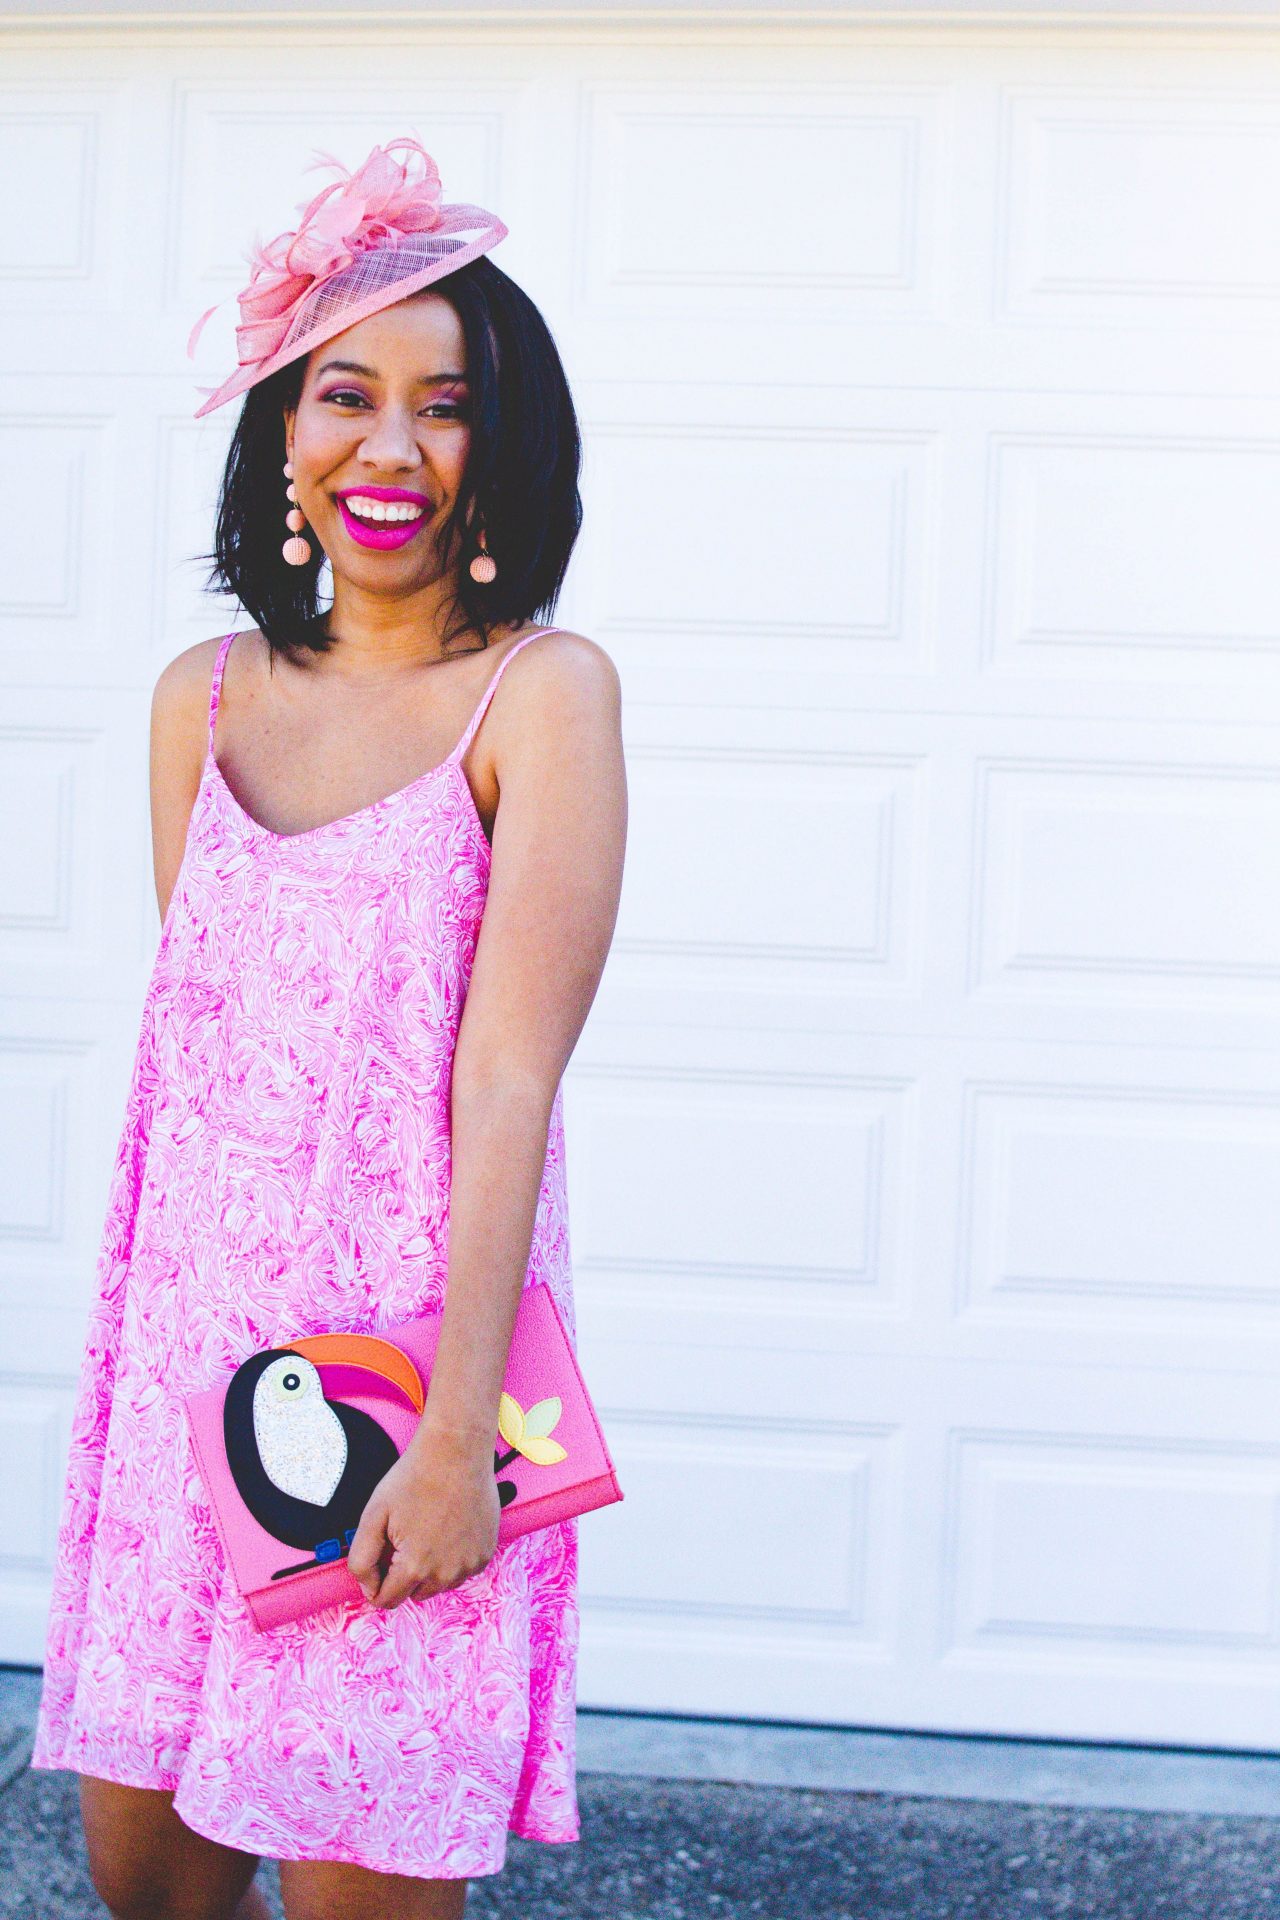 Streetwear Meets Pastel: How to Incorporate Pink into Streetwear Outfits for Black Women